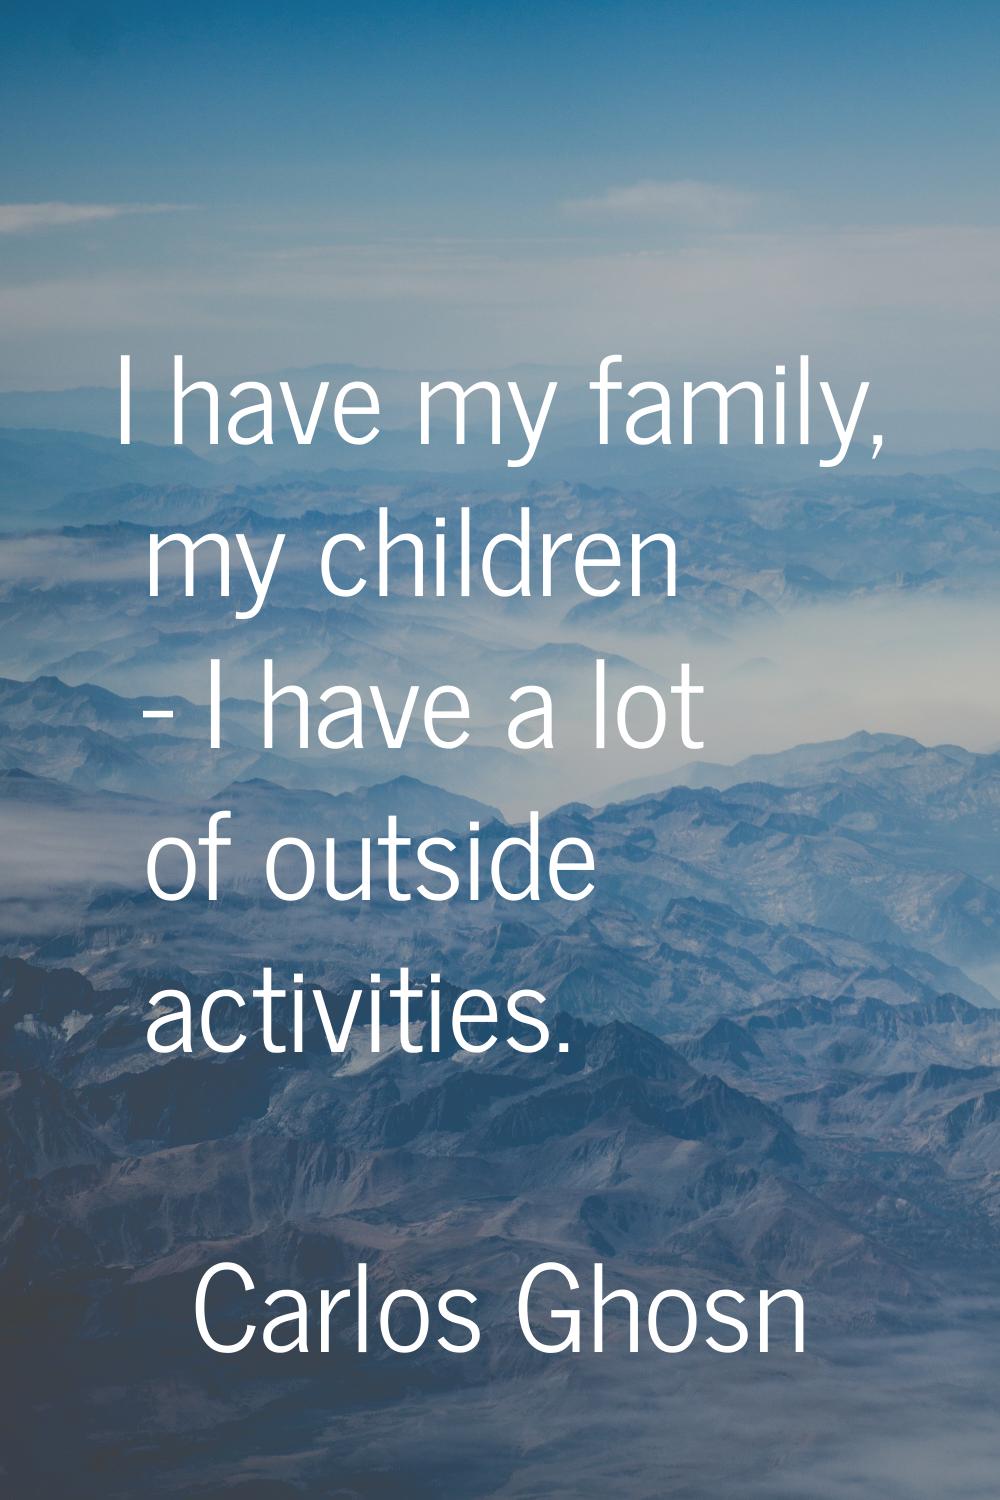 I have my family, my children - I have a lot of outside activities.